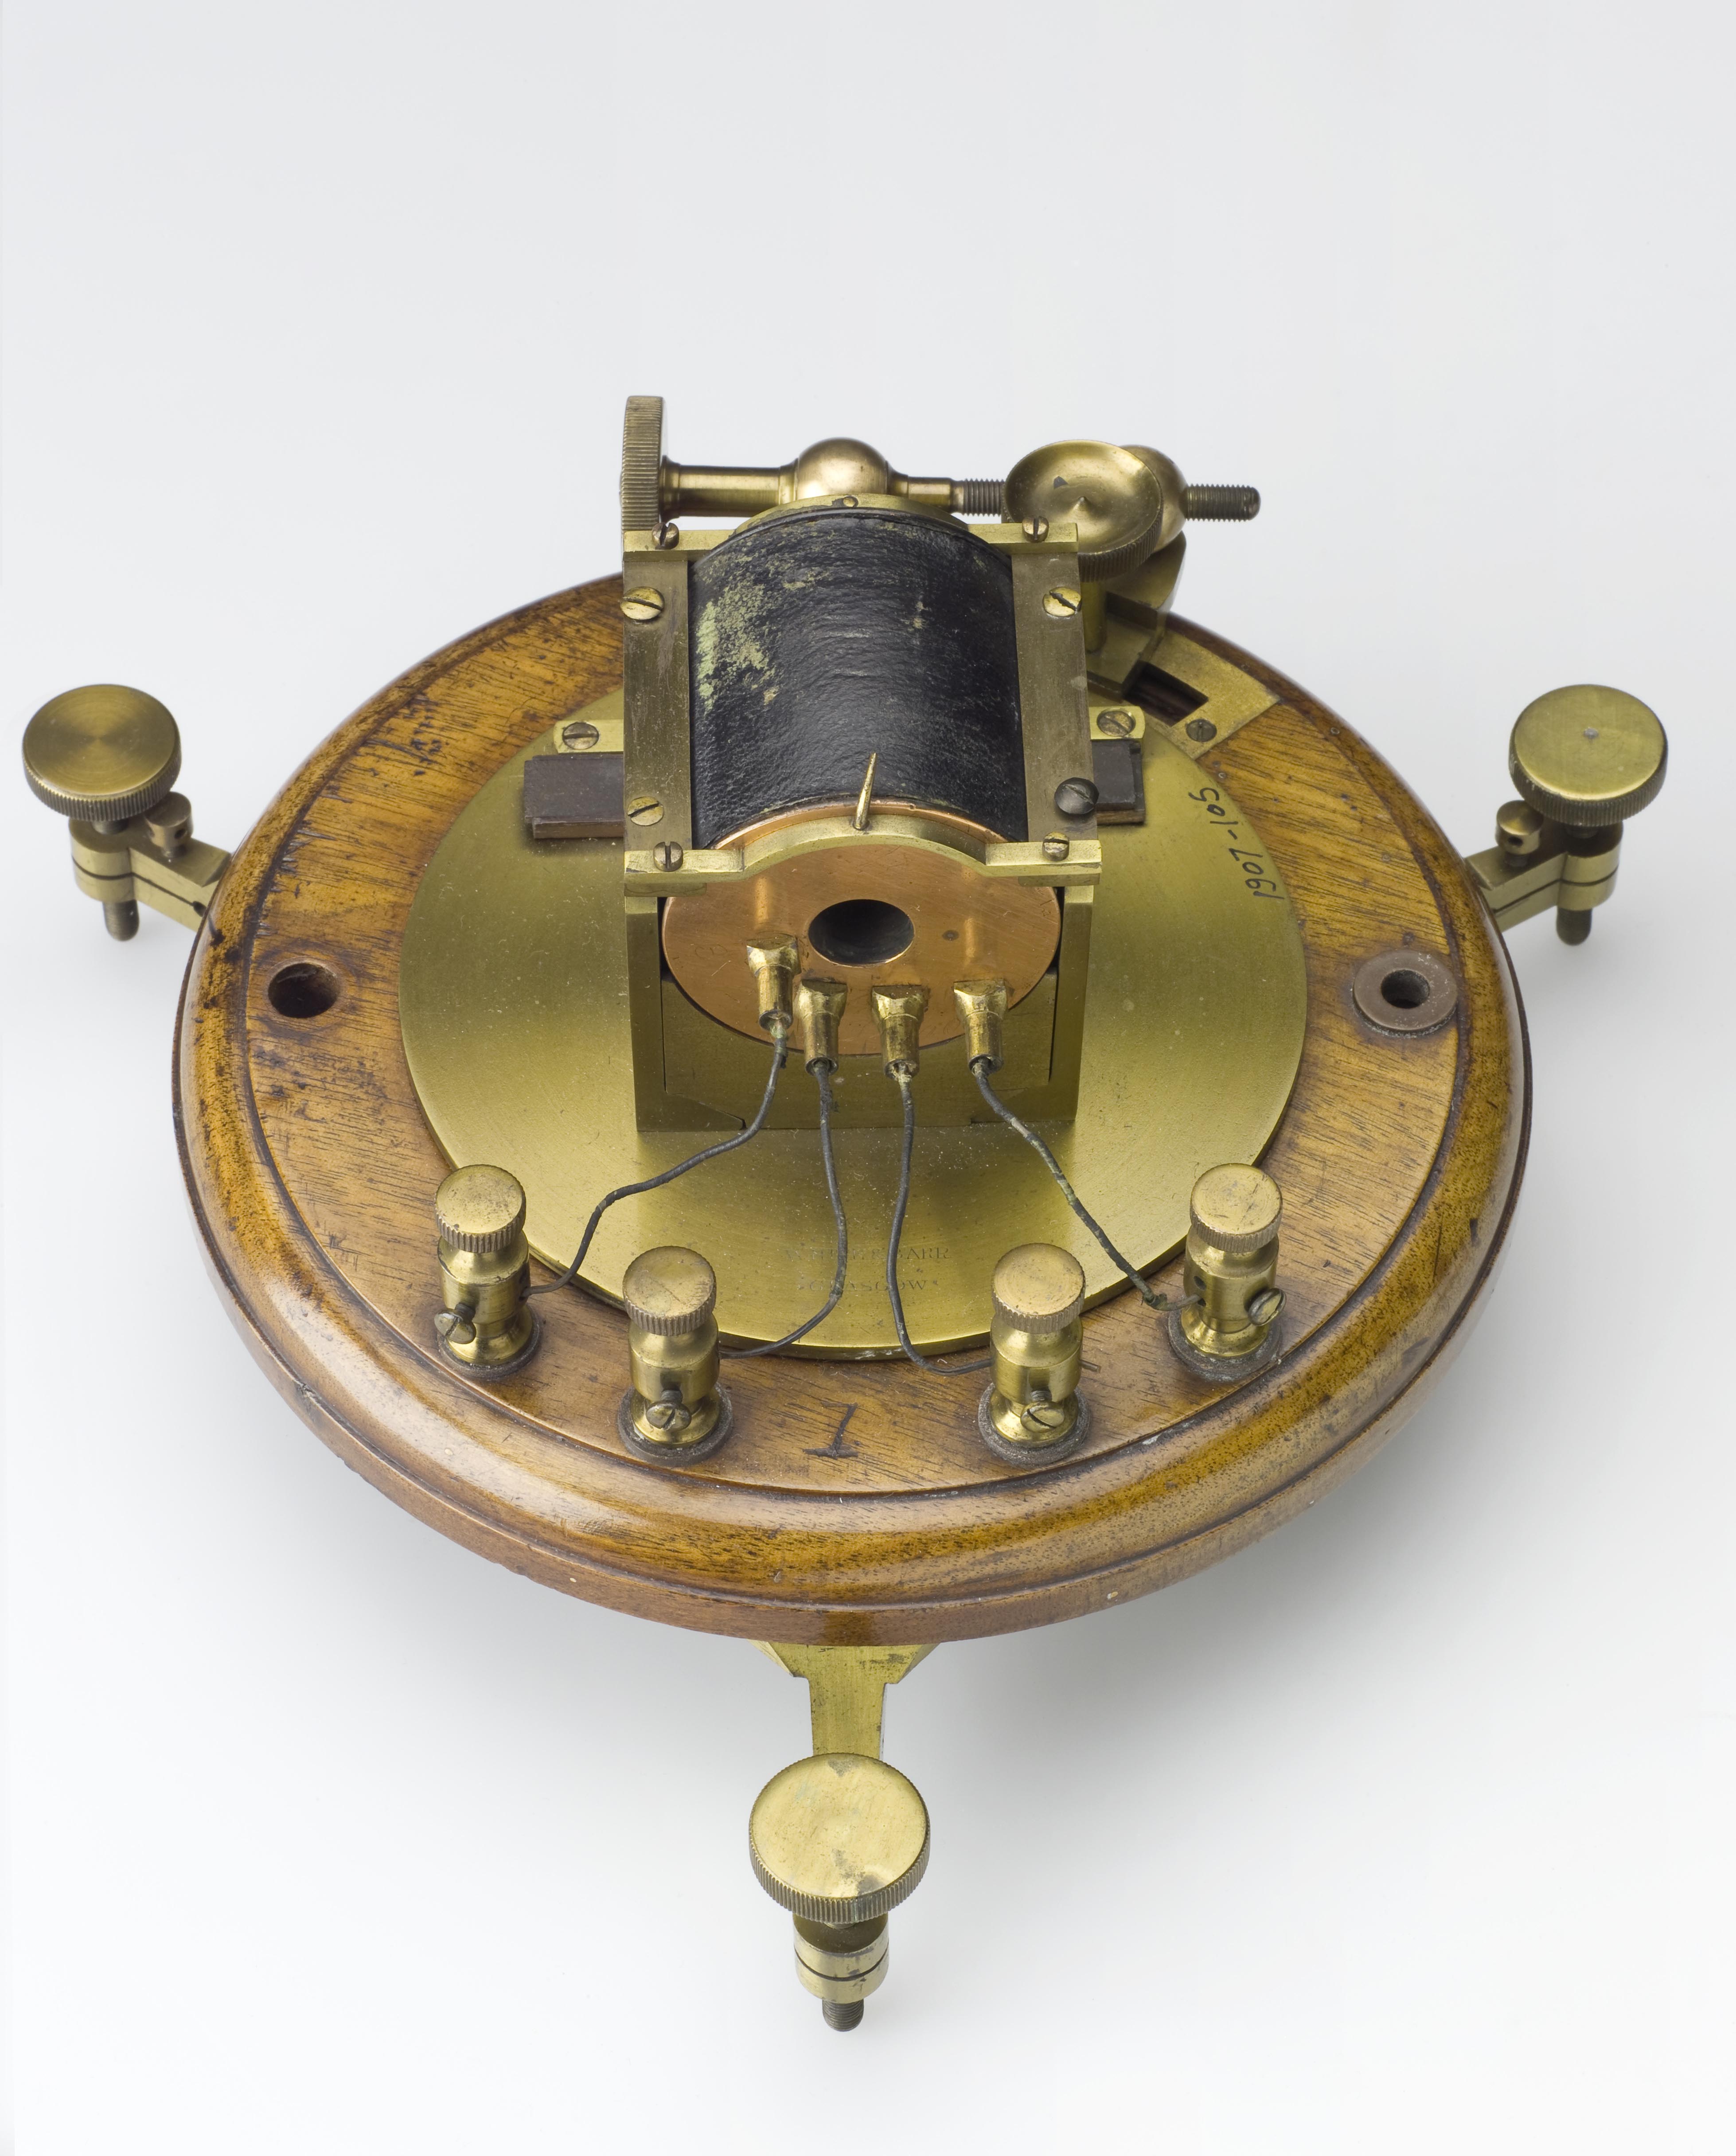 (Lord Kelvin) Thomson's mirror galvanometer (land type) used at Valentia Island end of the original Atlantic cable in 1858. Made by White & Barr, Glasgow. Image credit: Science Museum / SSPL.